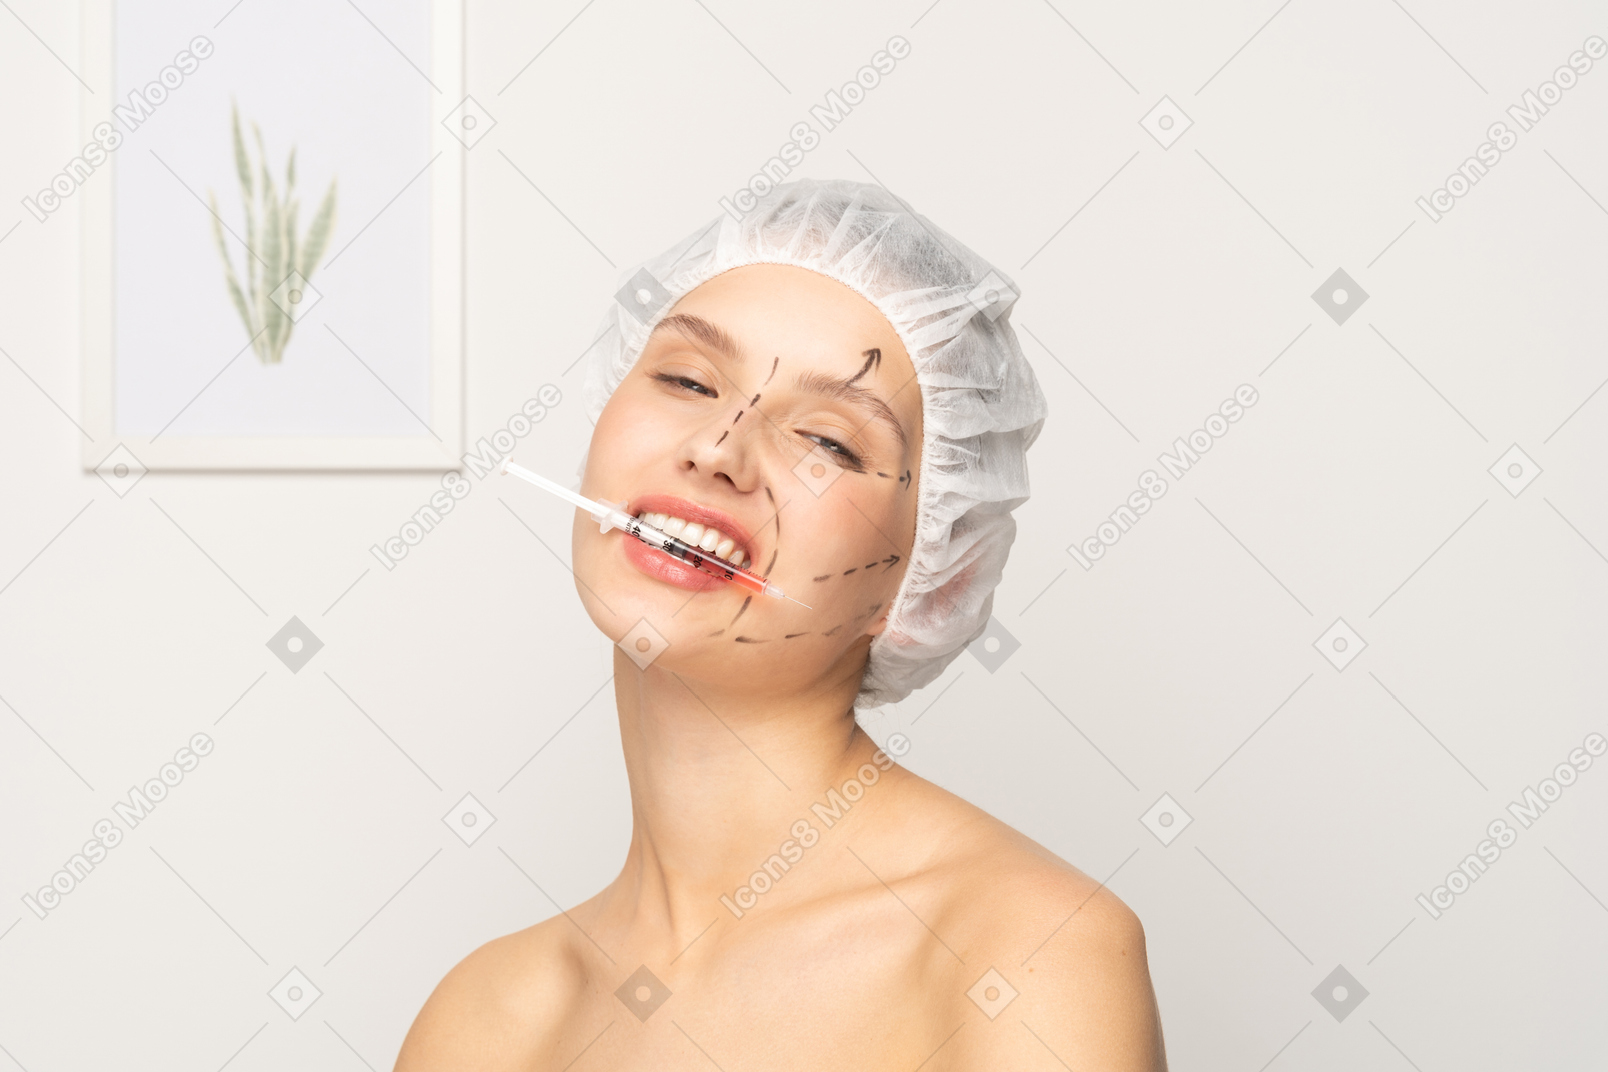 Young woman smiling with syringe in her teeth